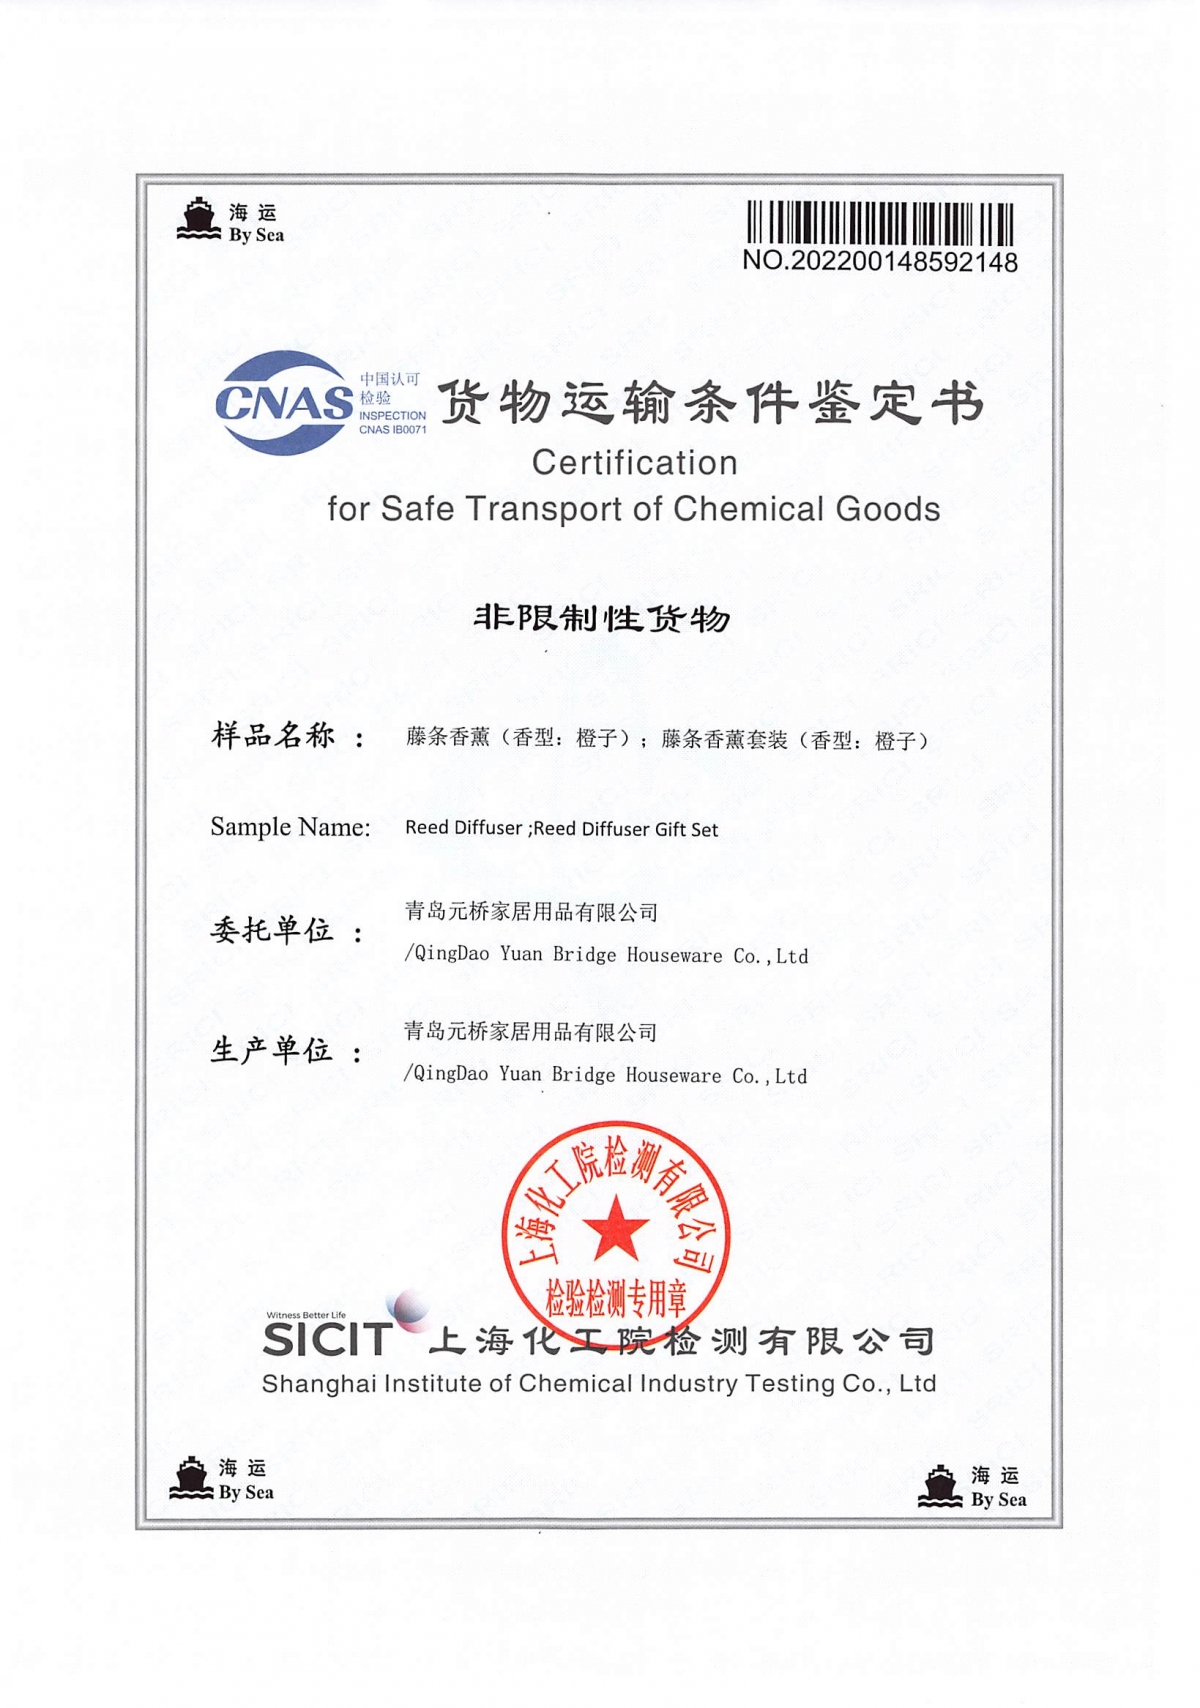 Reed Diffuser ‘s Certification for Safe Transport of Chemical Goods ,China Factory-HOWCANDLE-Candles,Scented Candles,Aromatherapy Candles,Soy Candles,Vegan Candles,Jar Candles,Pillar Candles,Candle Gift Sets,Essential Oils,Reed Diffuser,Candle Holder,